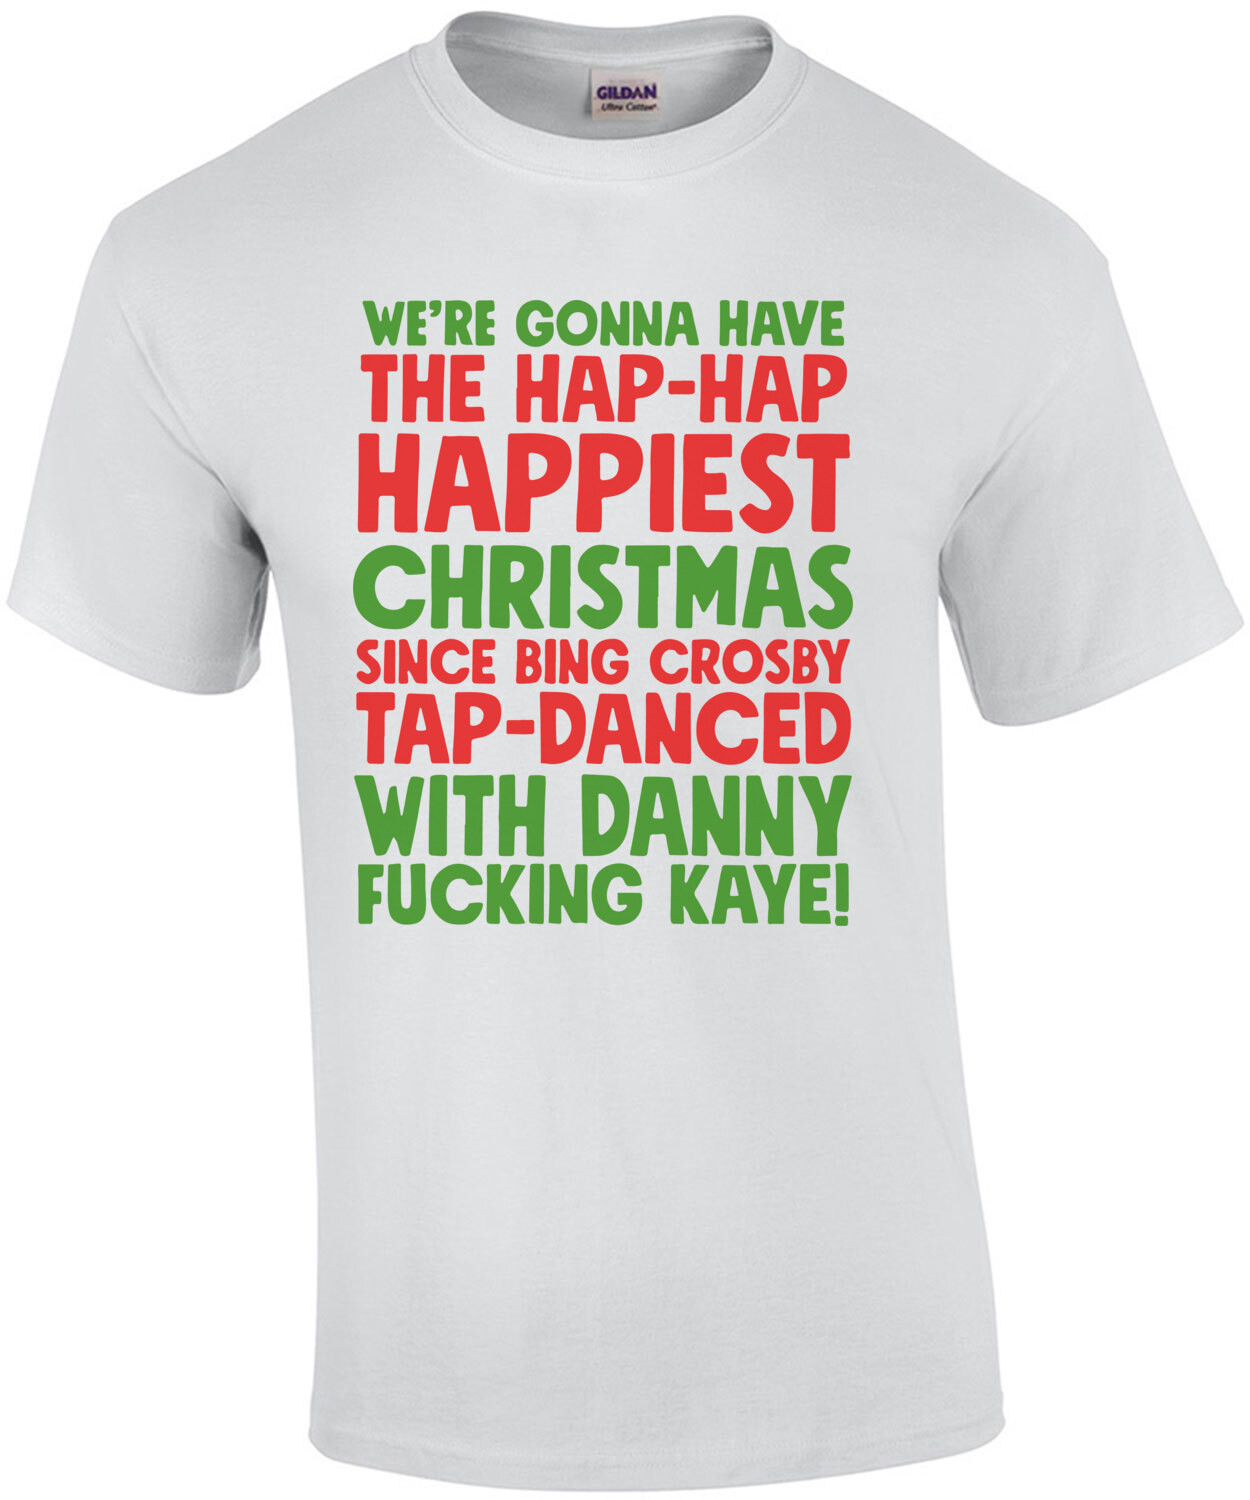 We're gonna have the hap-hap happiest Christmas since Bing Crosby tap-danced with Danny fucking Kay! Christmas T-Shirt